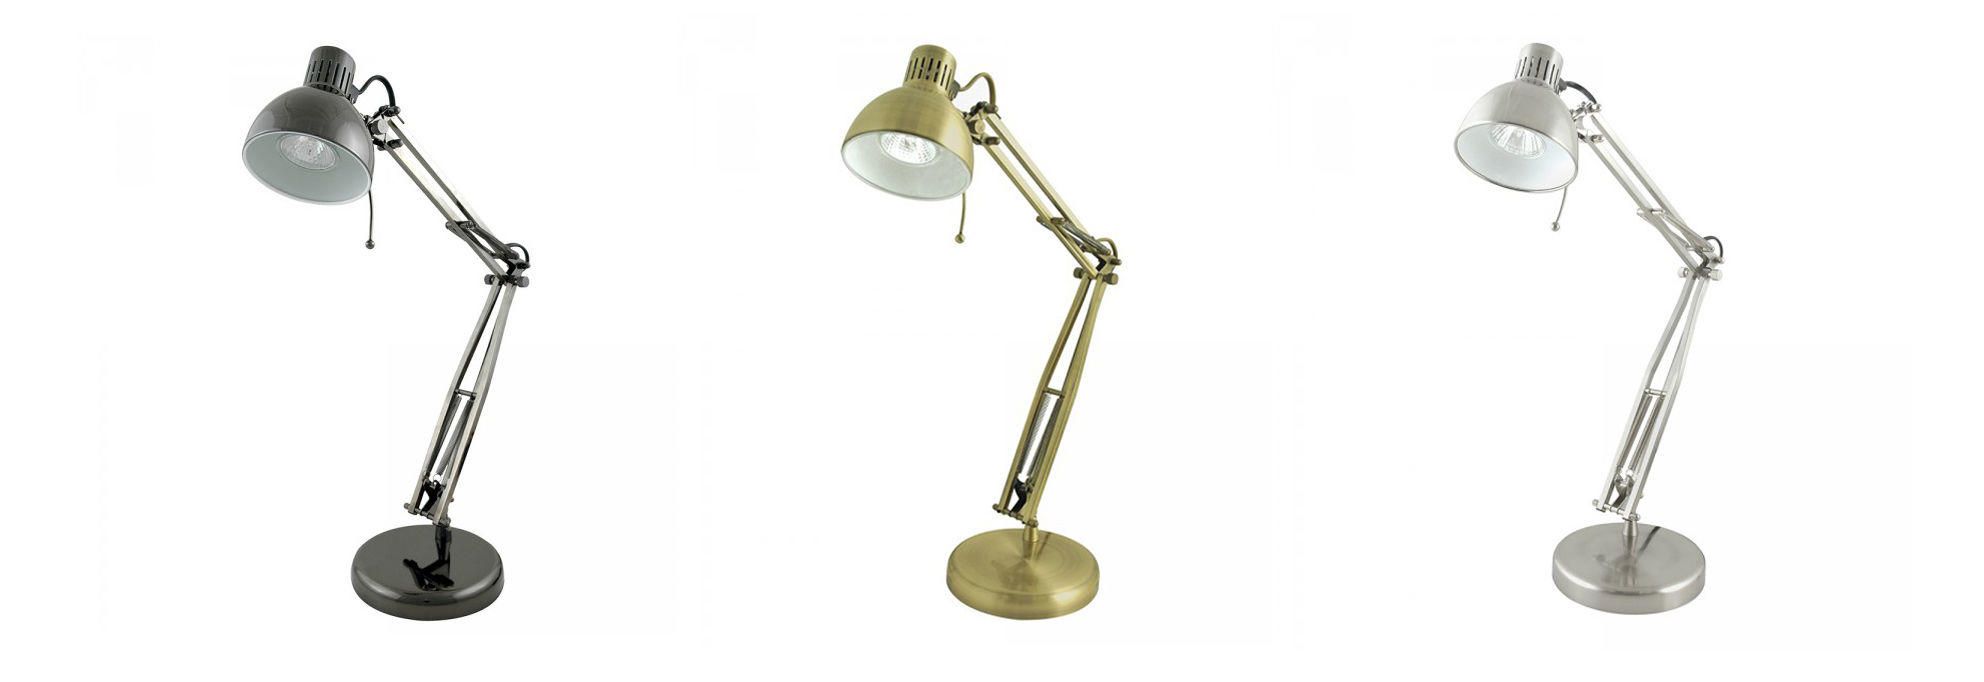 Study in Style : Industrial Style Task Lamps and Accessories